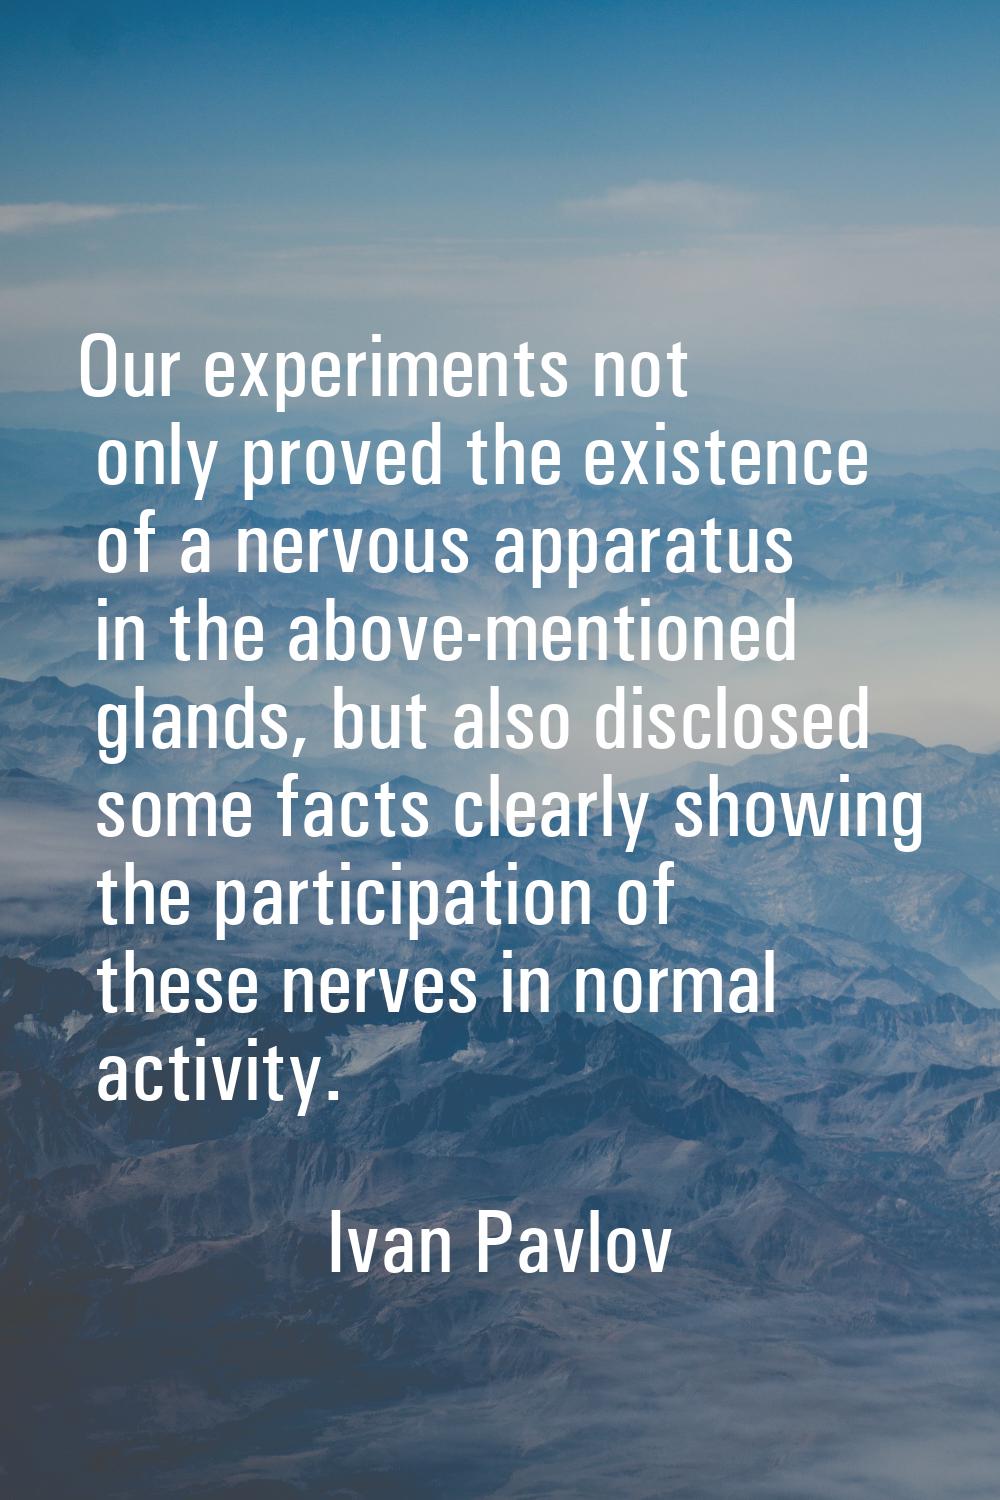 Our experiments not only proved the existence of a nervous apparatus in the above-mentioned glands,